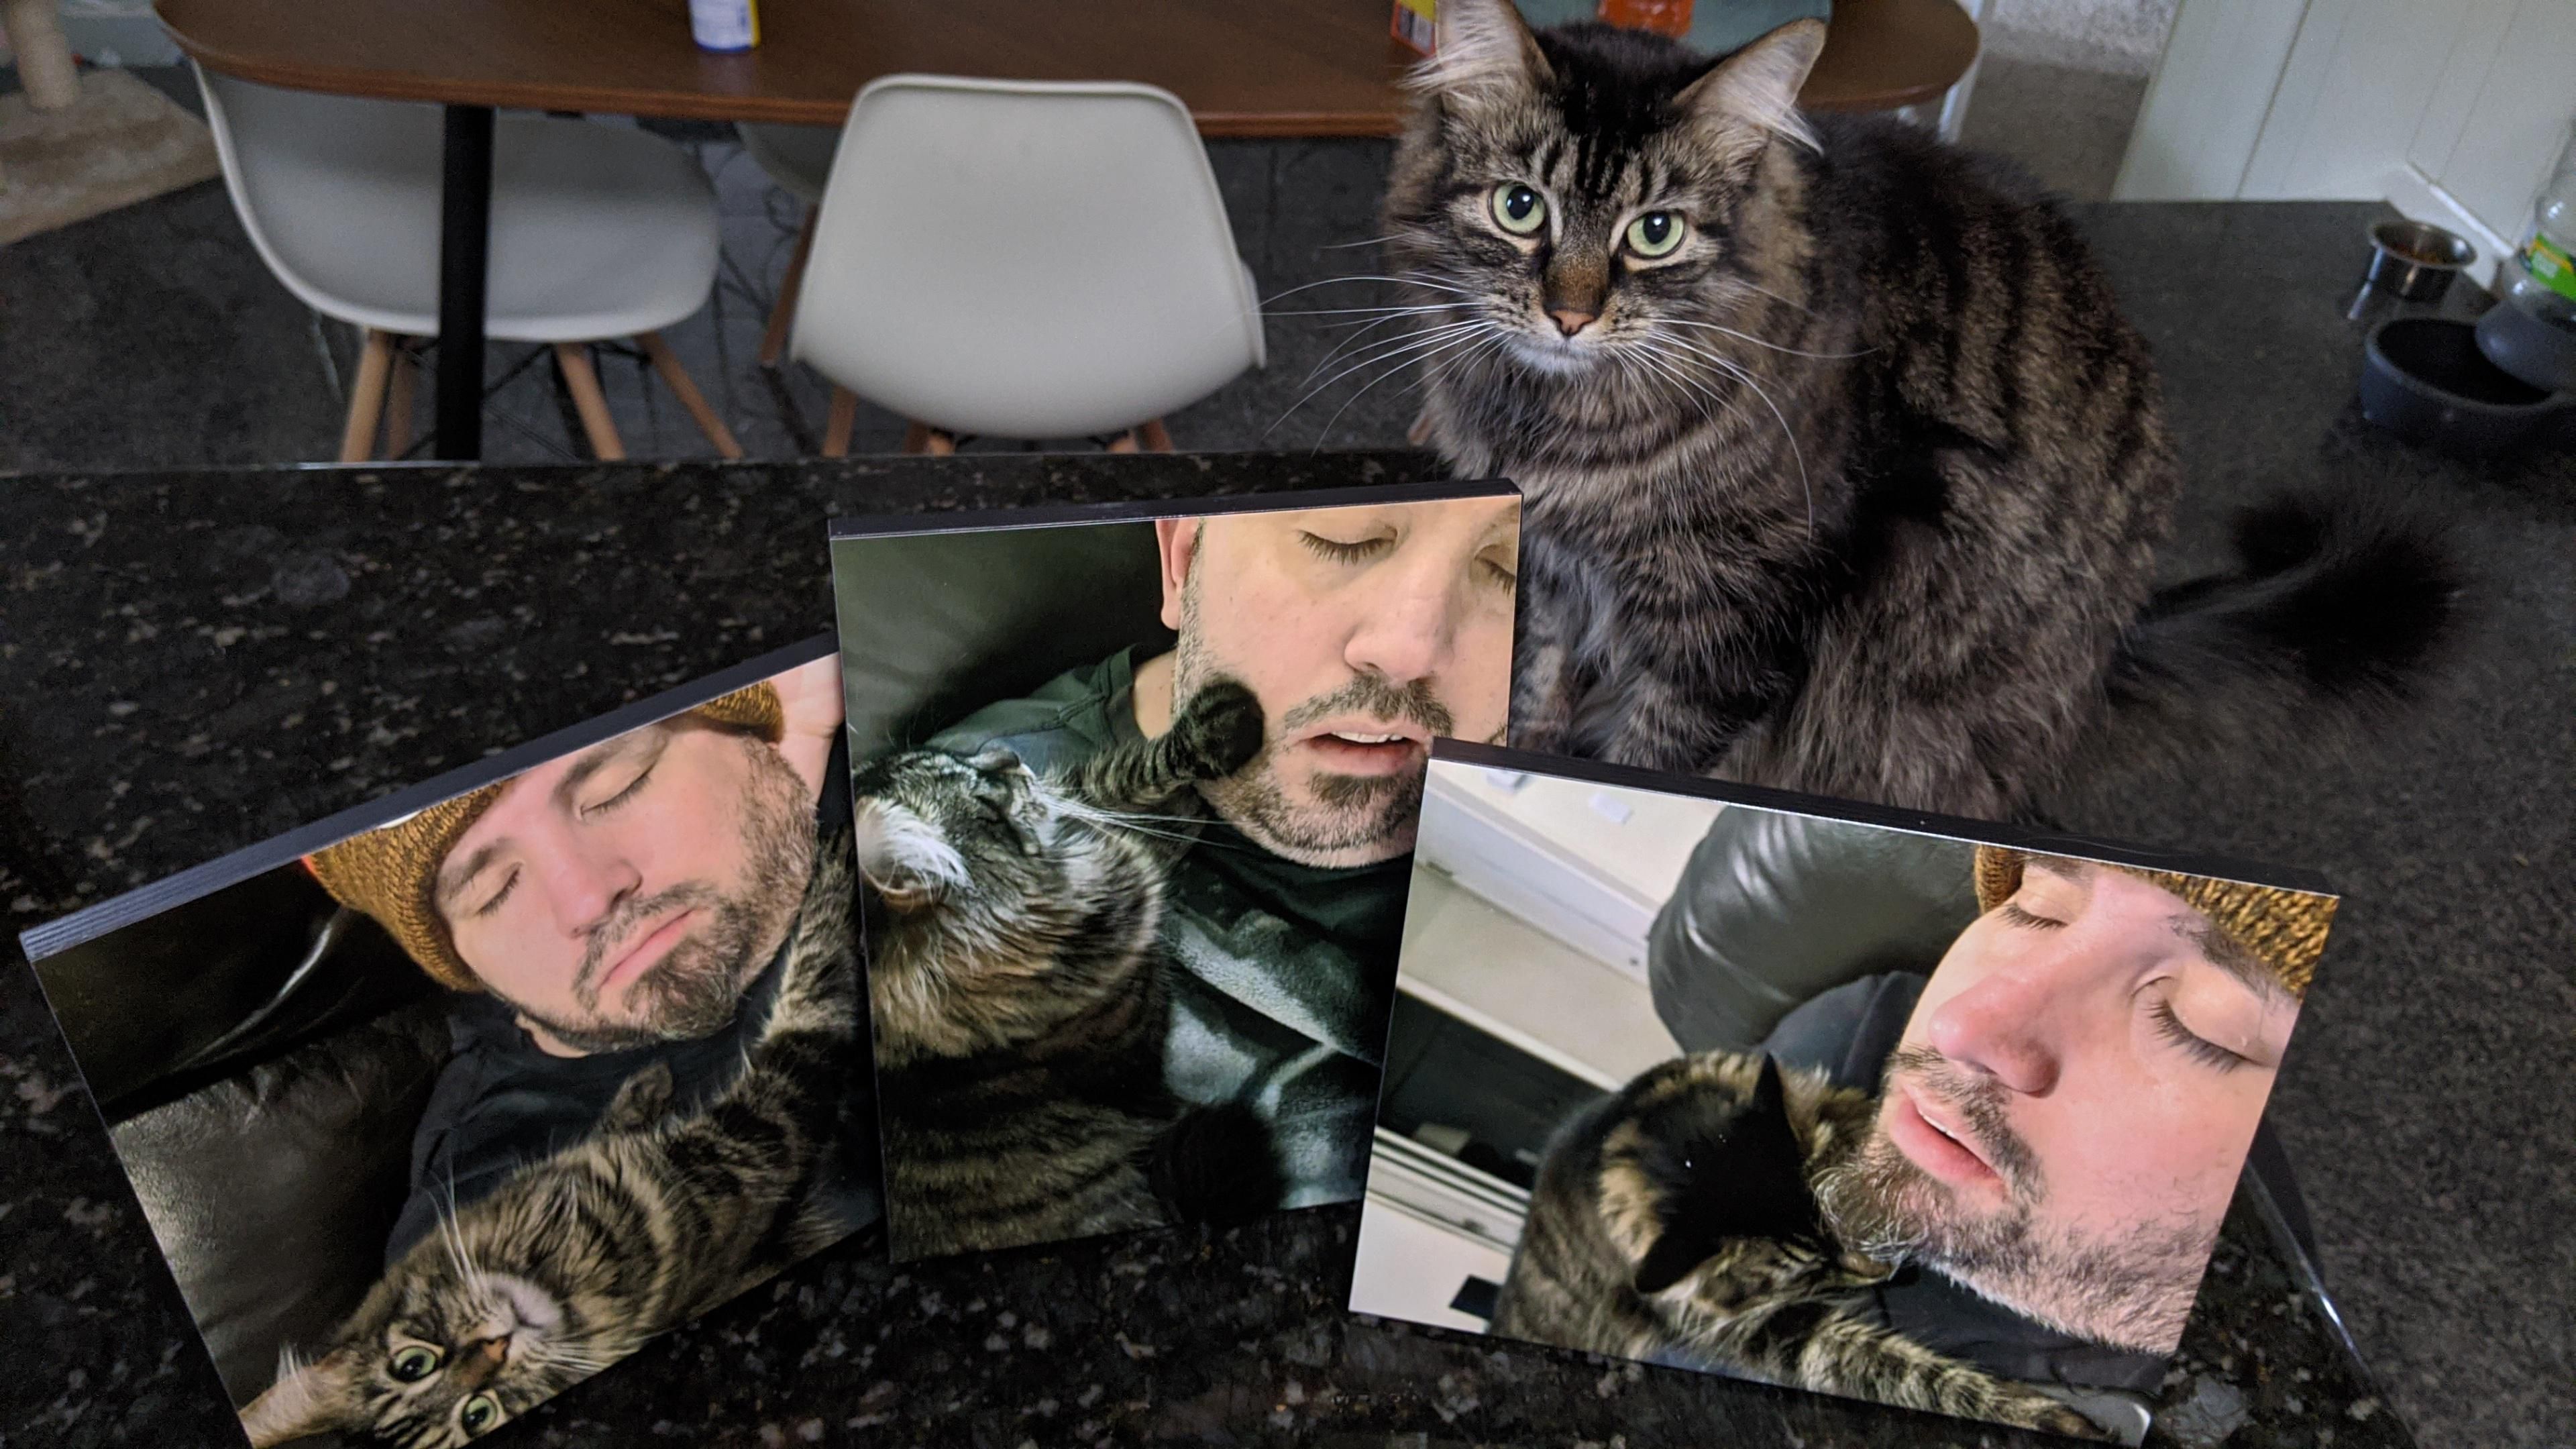 My Wife has been secretly collecting pictures of me for months sleeping. Today, for Father's Day, I was gifted the collection. I present "Catnapping".